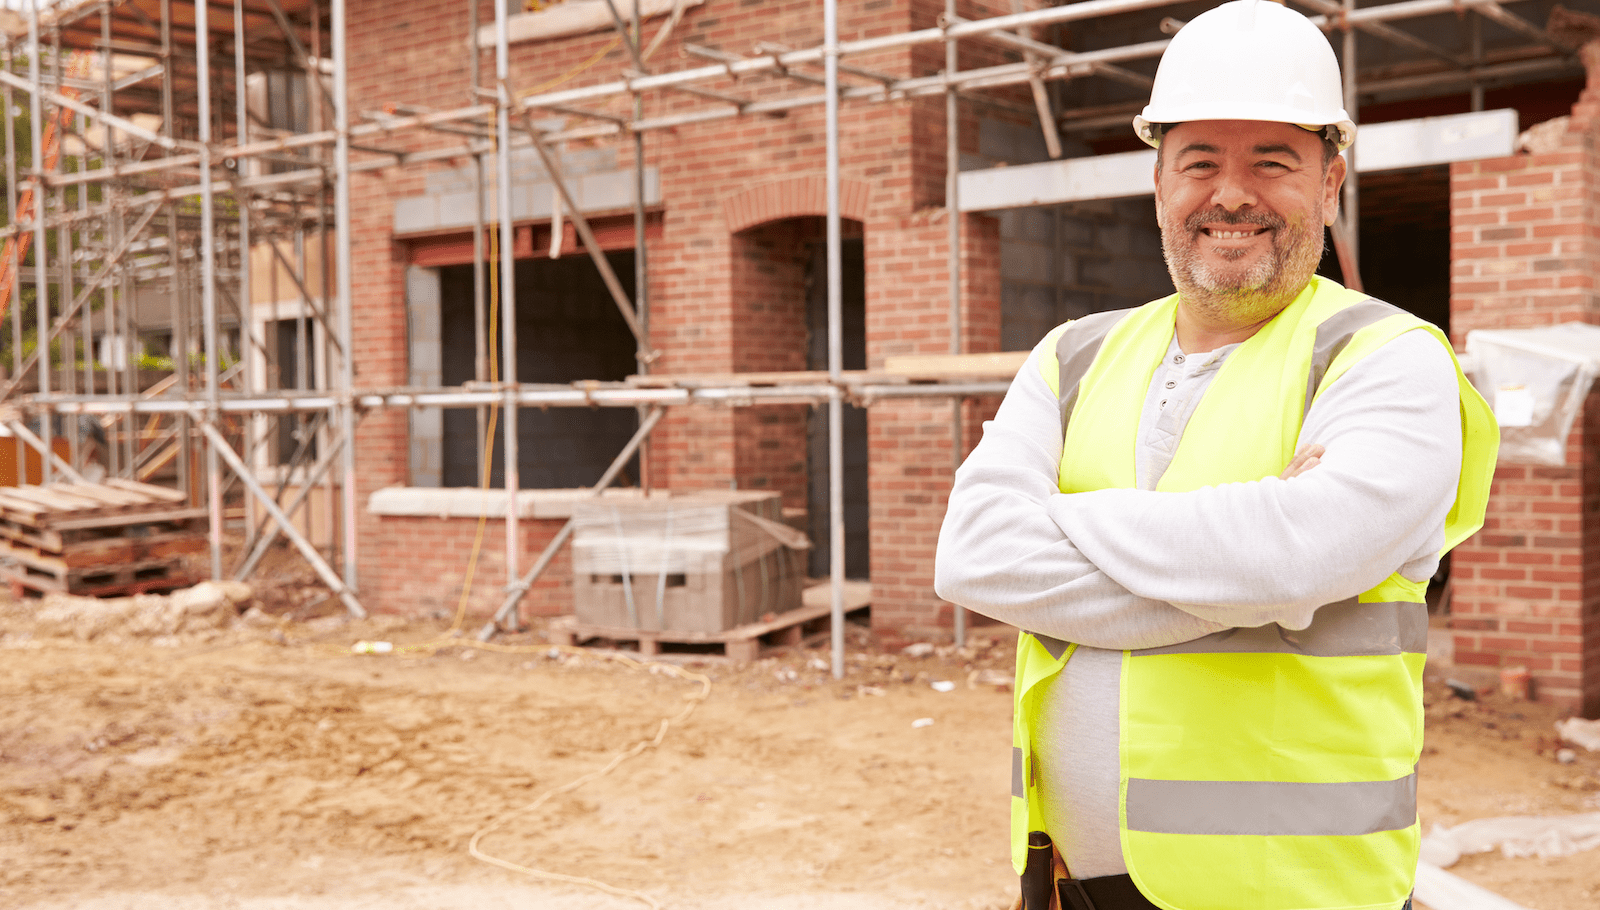 Happy home builder who enjoys his work standing in front of brick home under construction